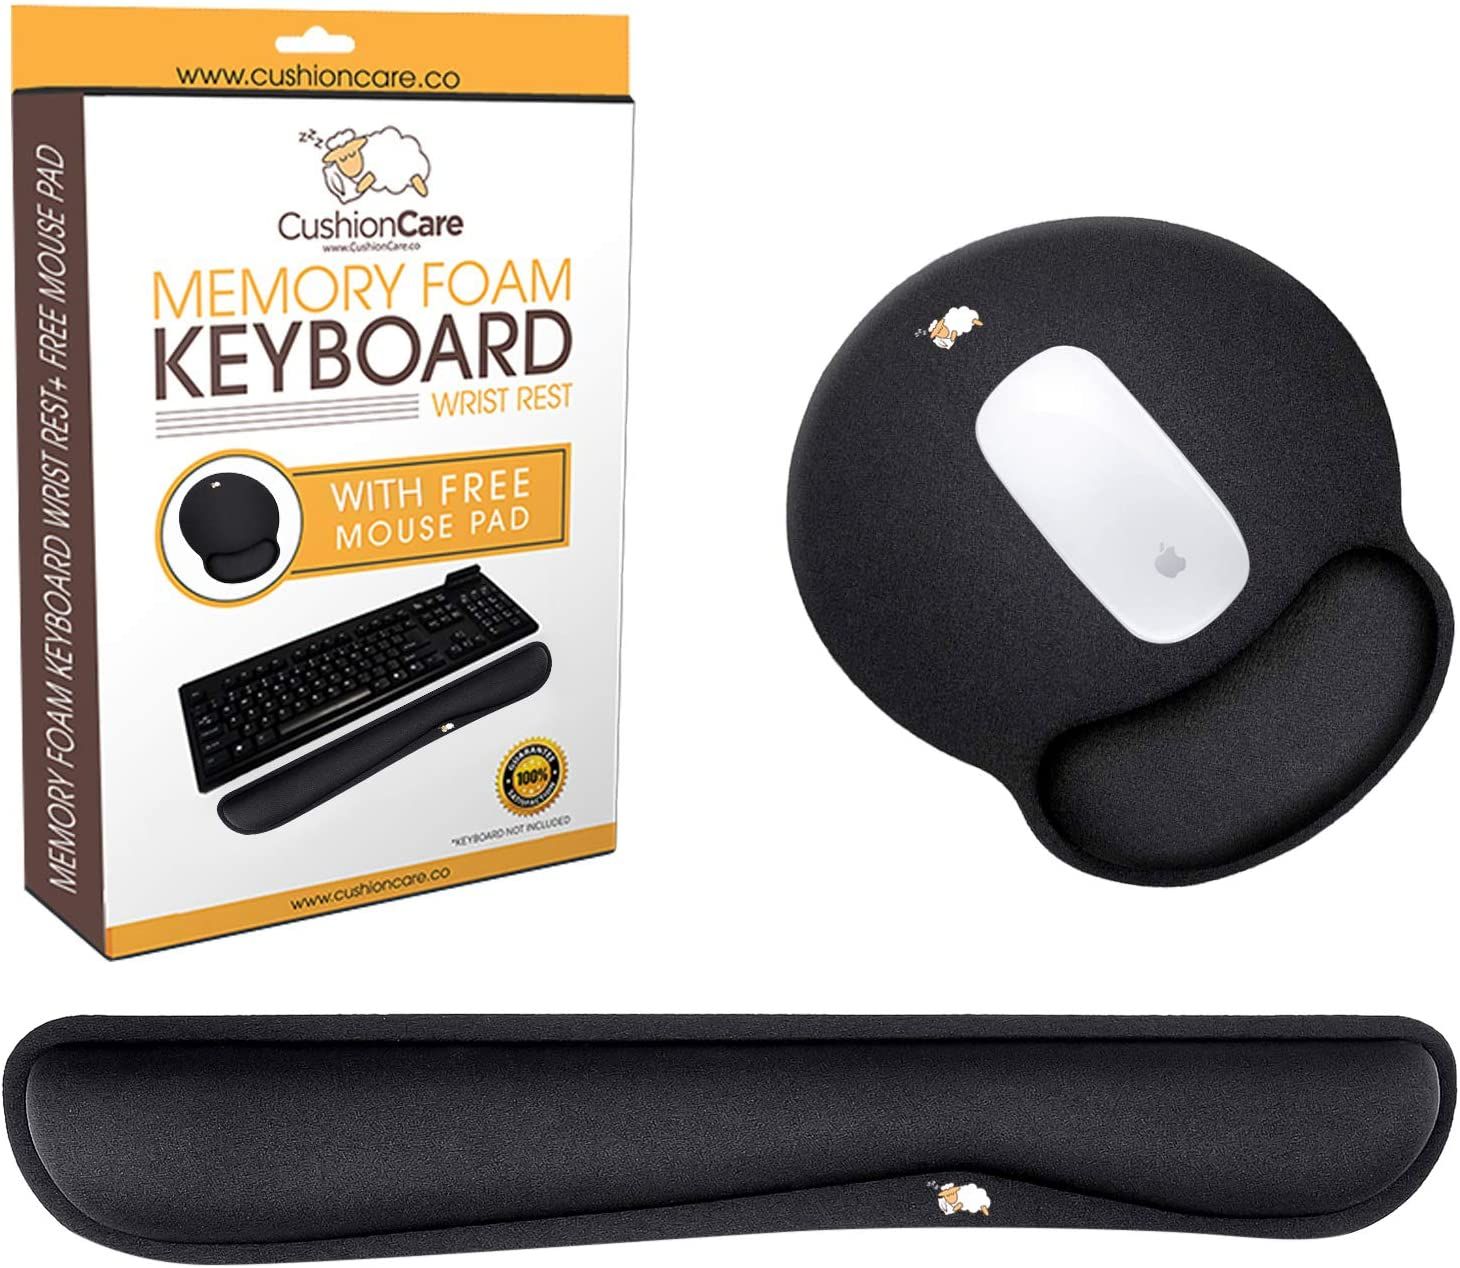 A Cushioncare wrist rest set with packaging